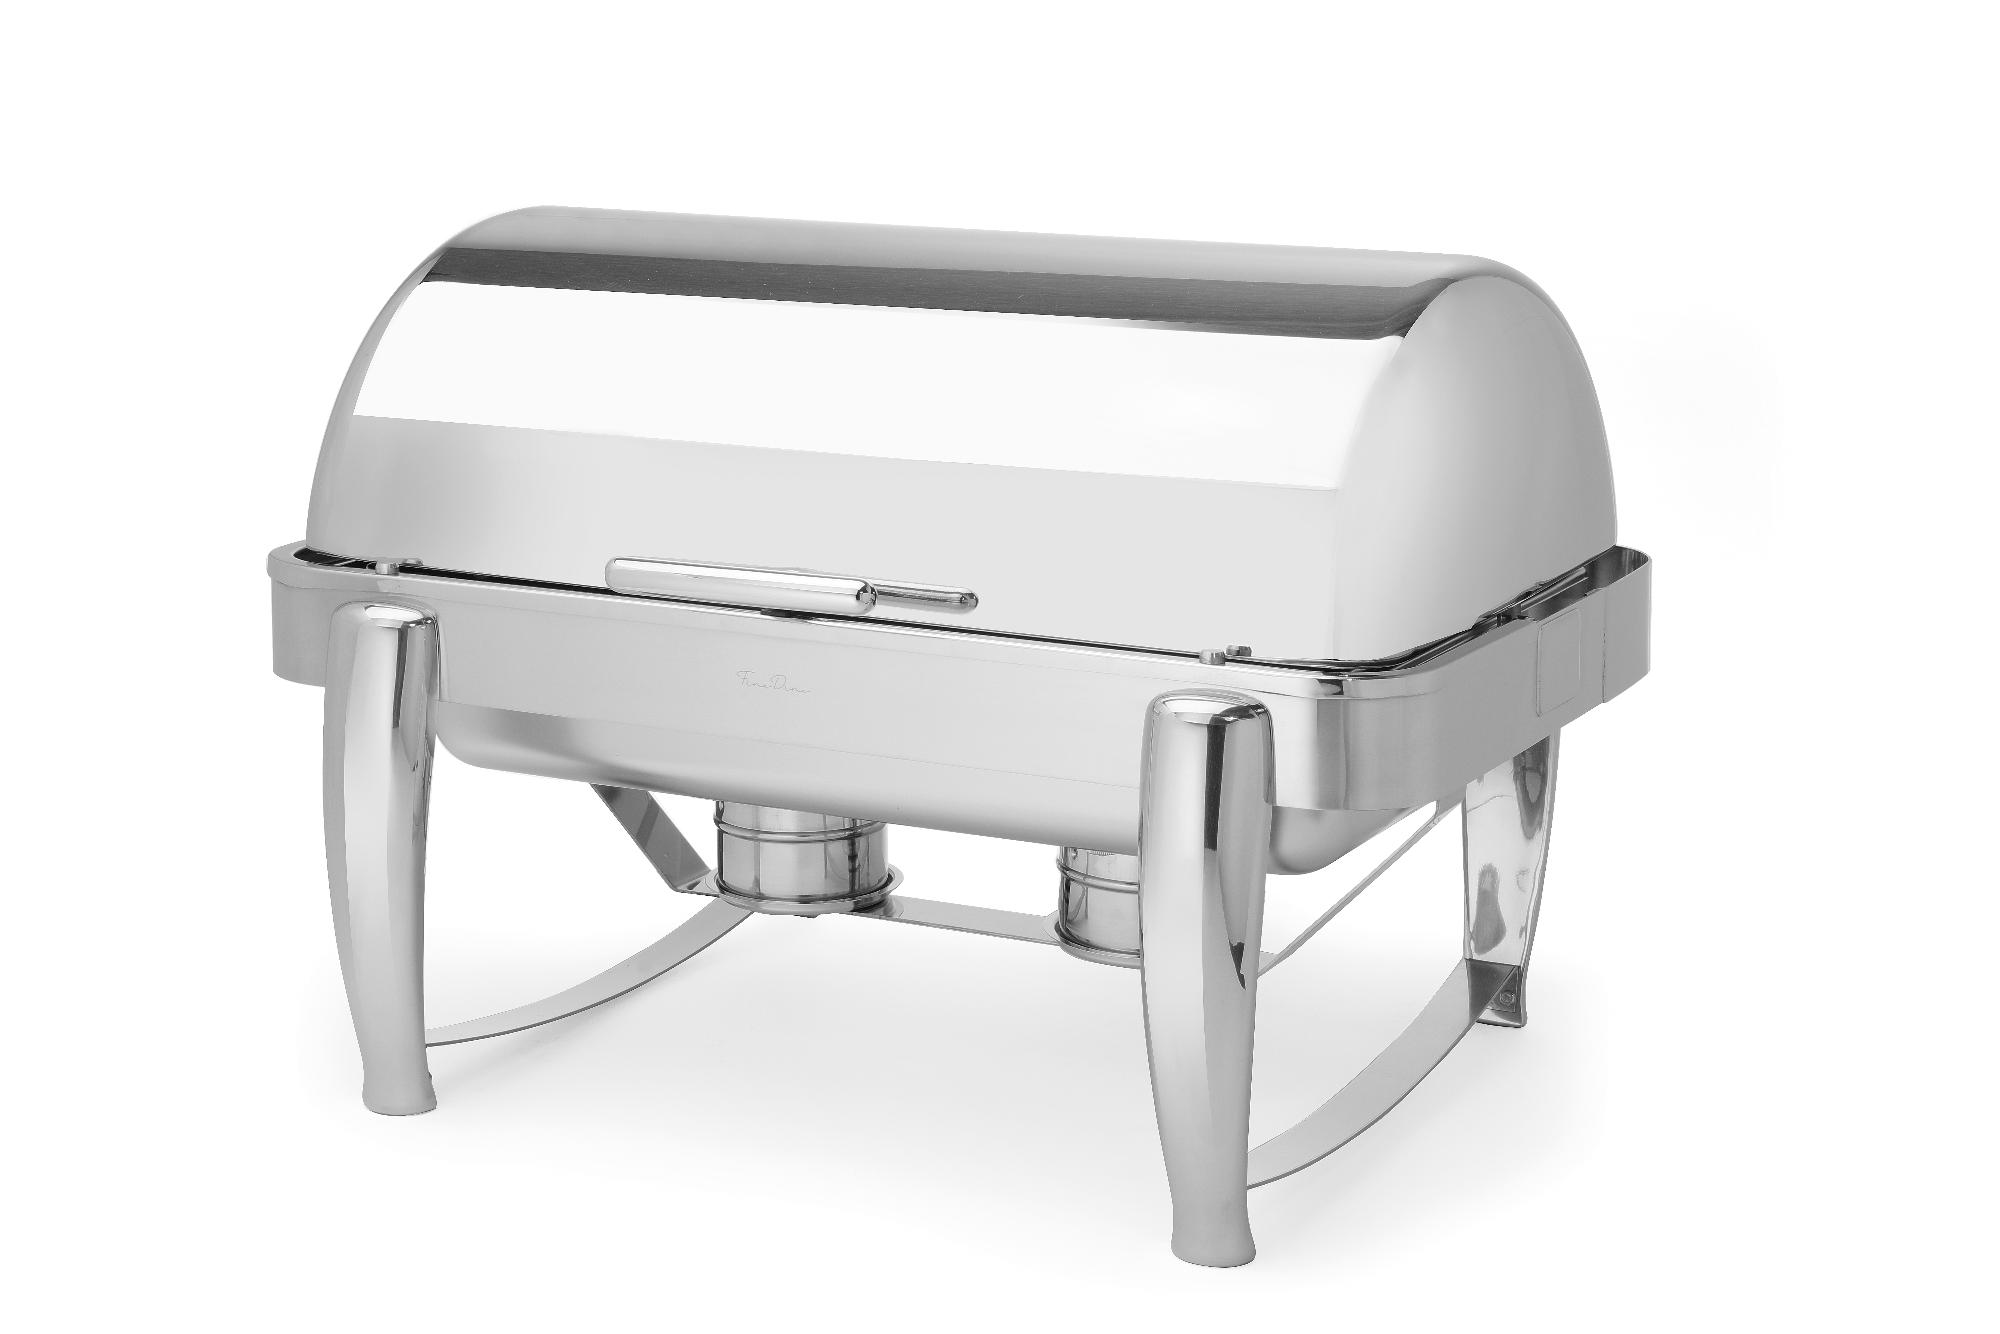 Excellent Rolltop chafing dish GN 1/1